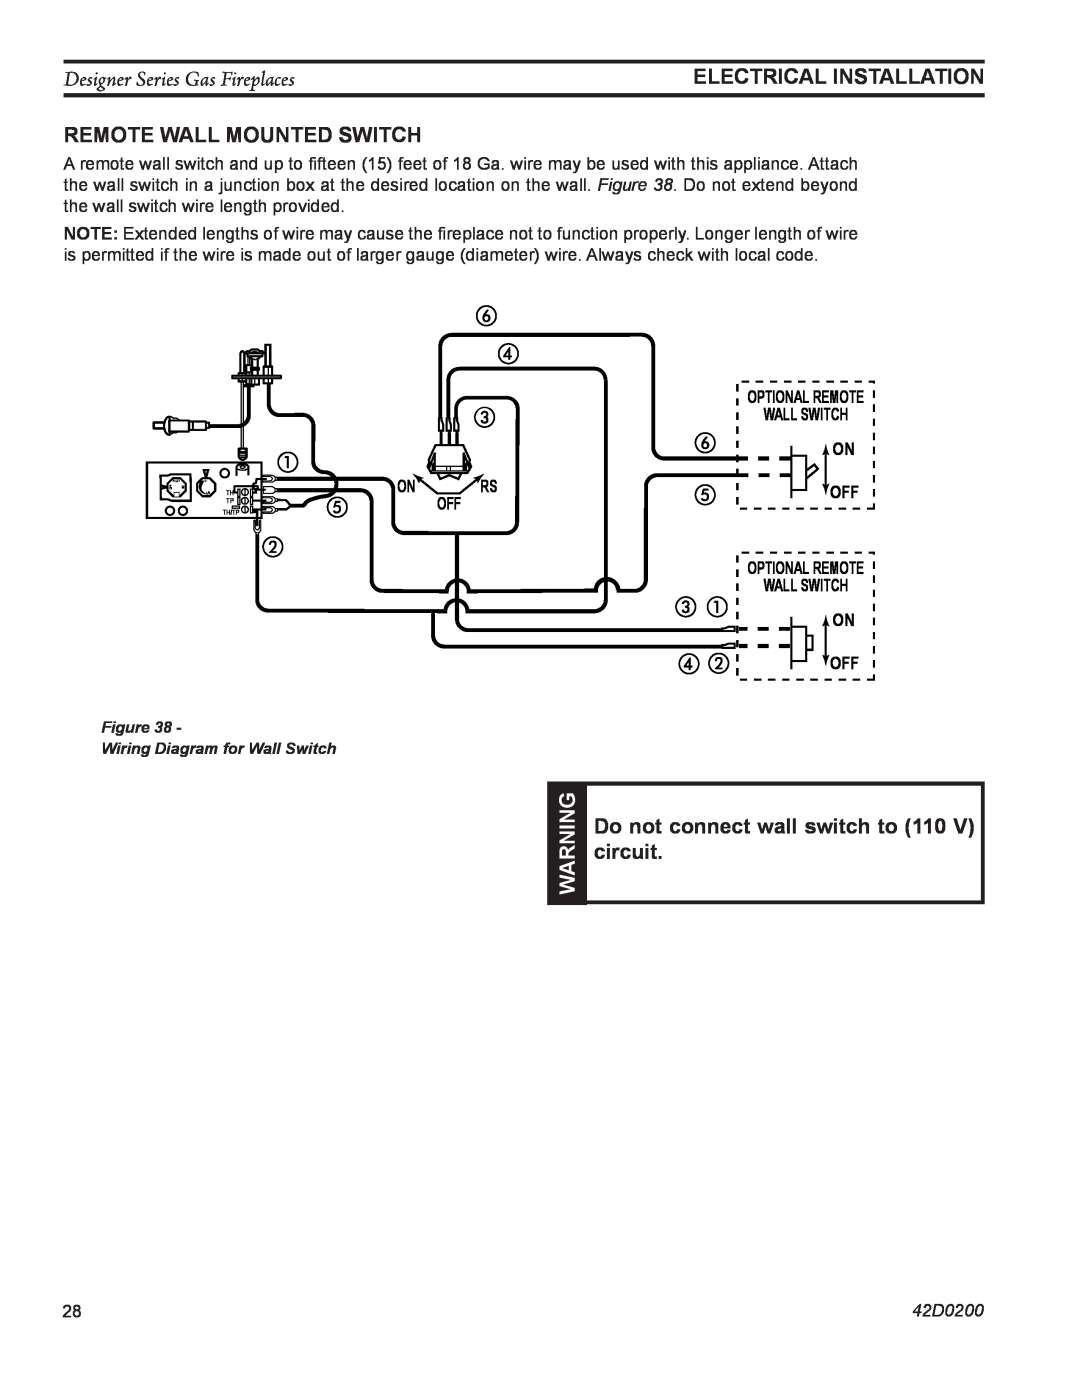 Monessen Hearth PF, CR Electrical installation, Remote Wall mounted Switch, Do not connect wall switch to 110 V circuit 